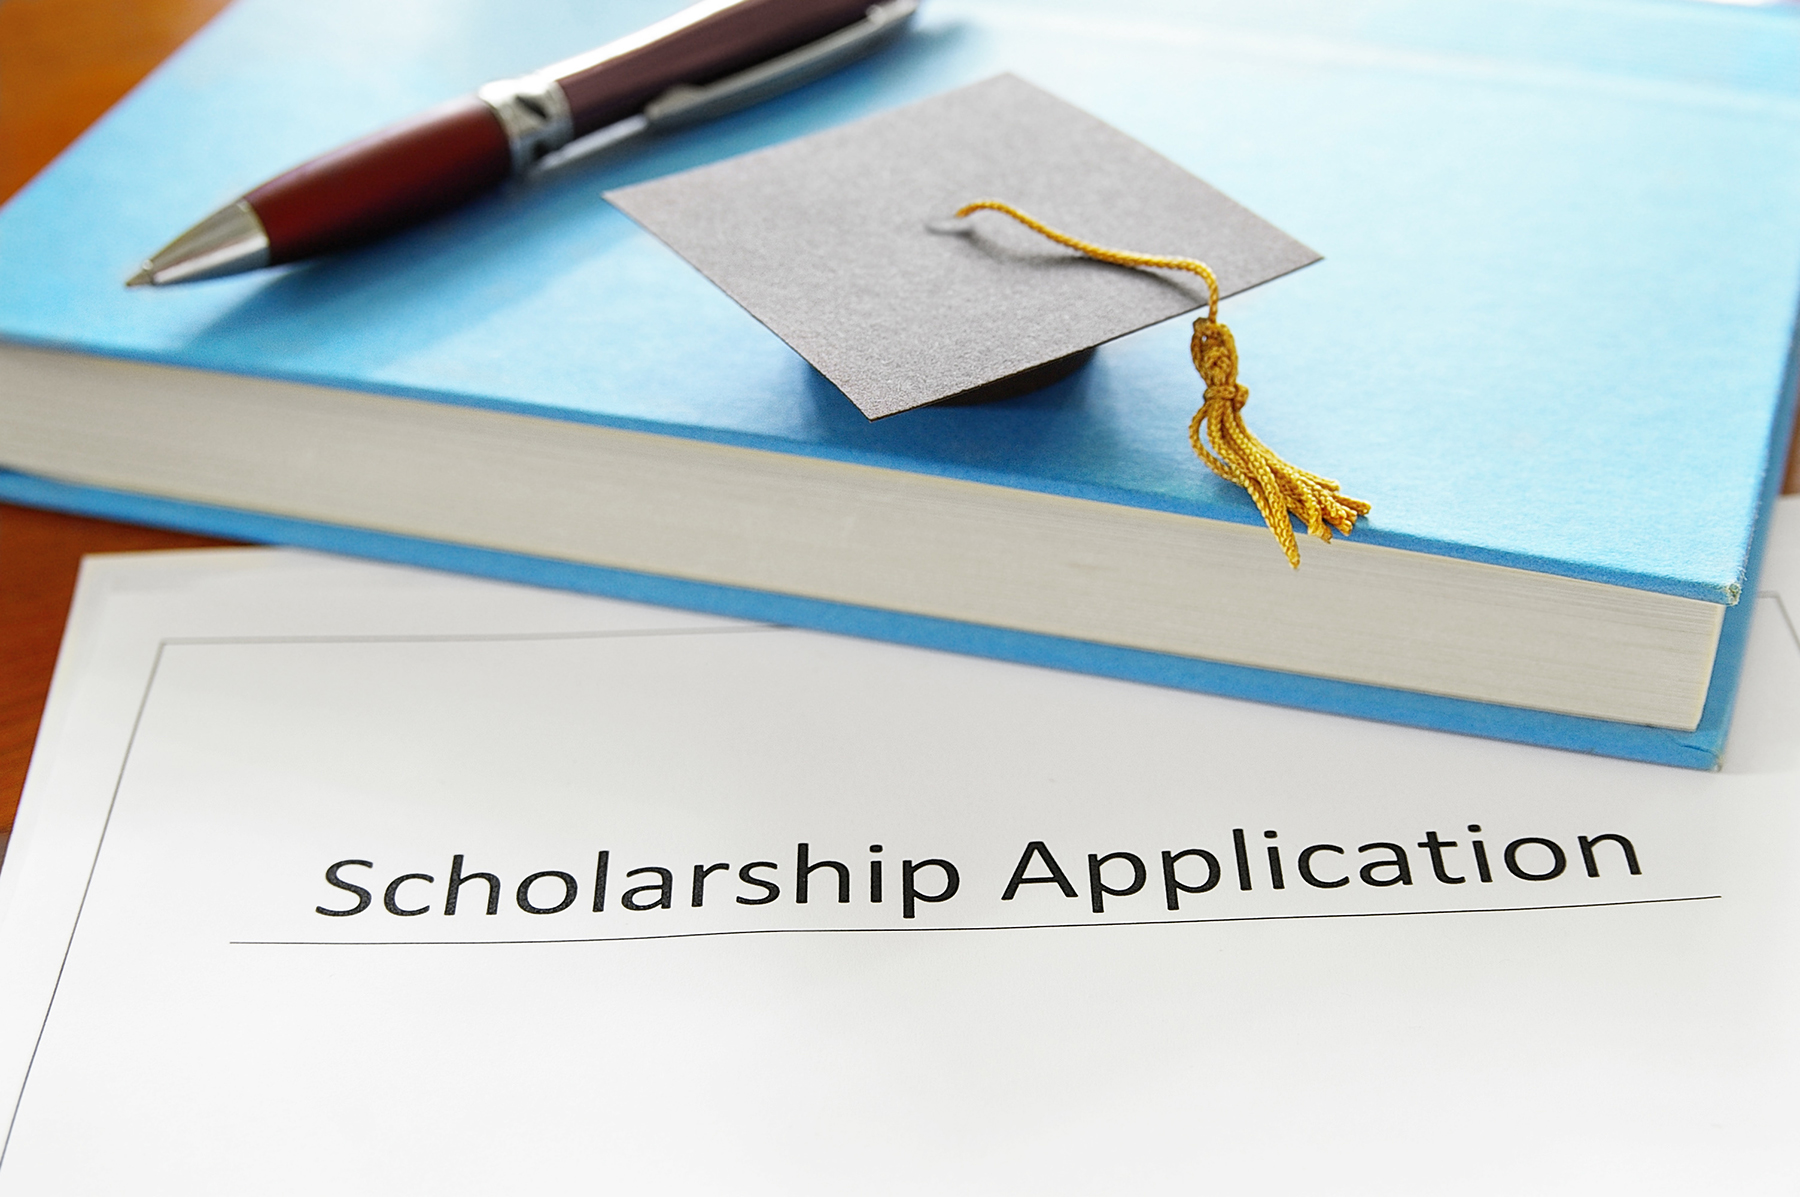 Scholarship application form next to book